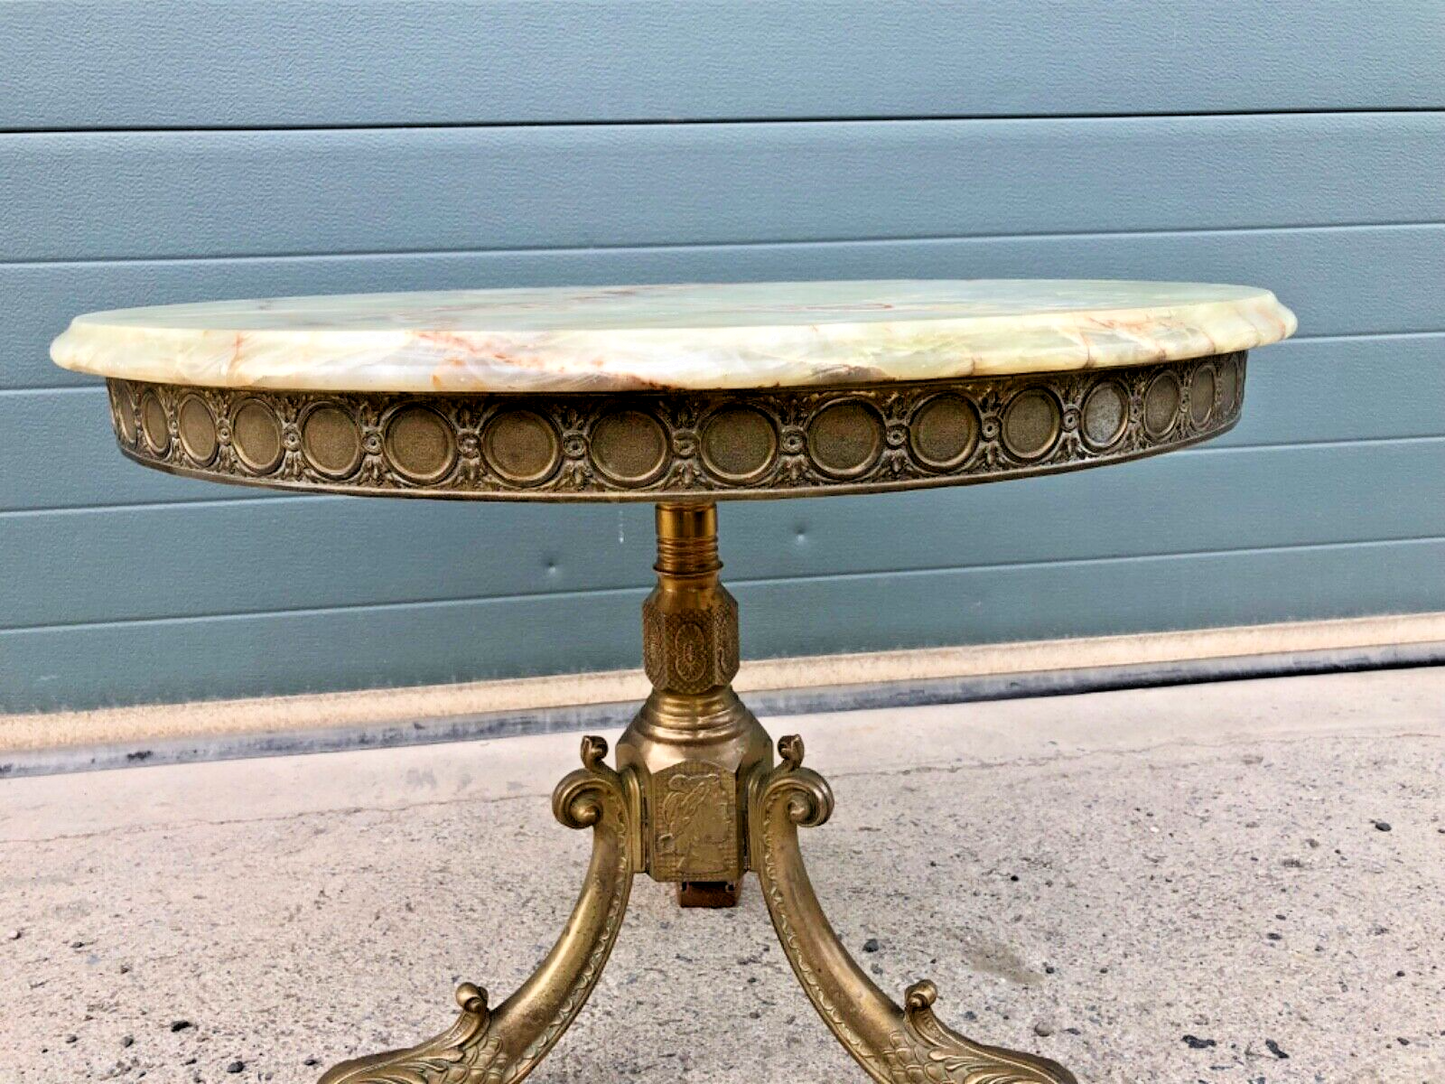 000832....Round Onyx Coffee Table On Decorative Dolphin Brass Base. ( Sold )